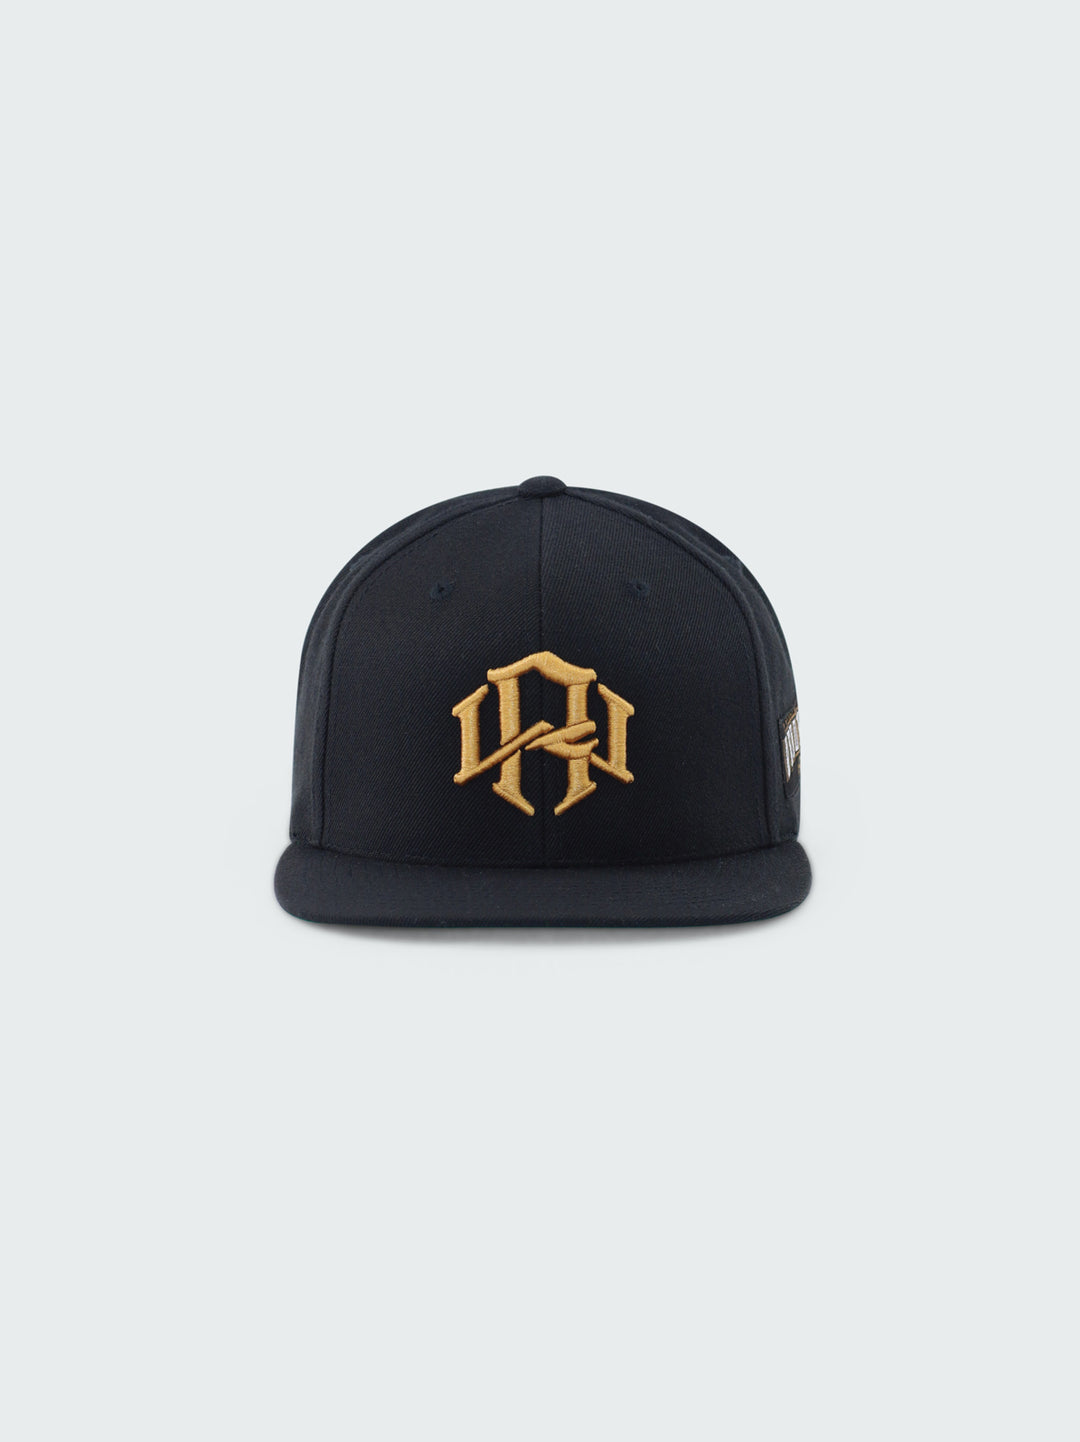 Black Snapback Cap by RENOWNED WEAR featuring a Gold 3D Embroidered front log